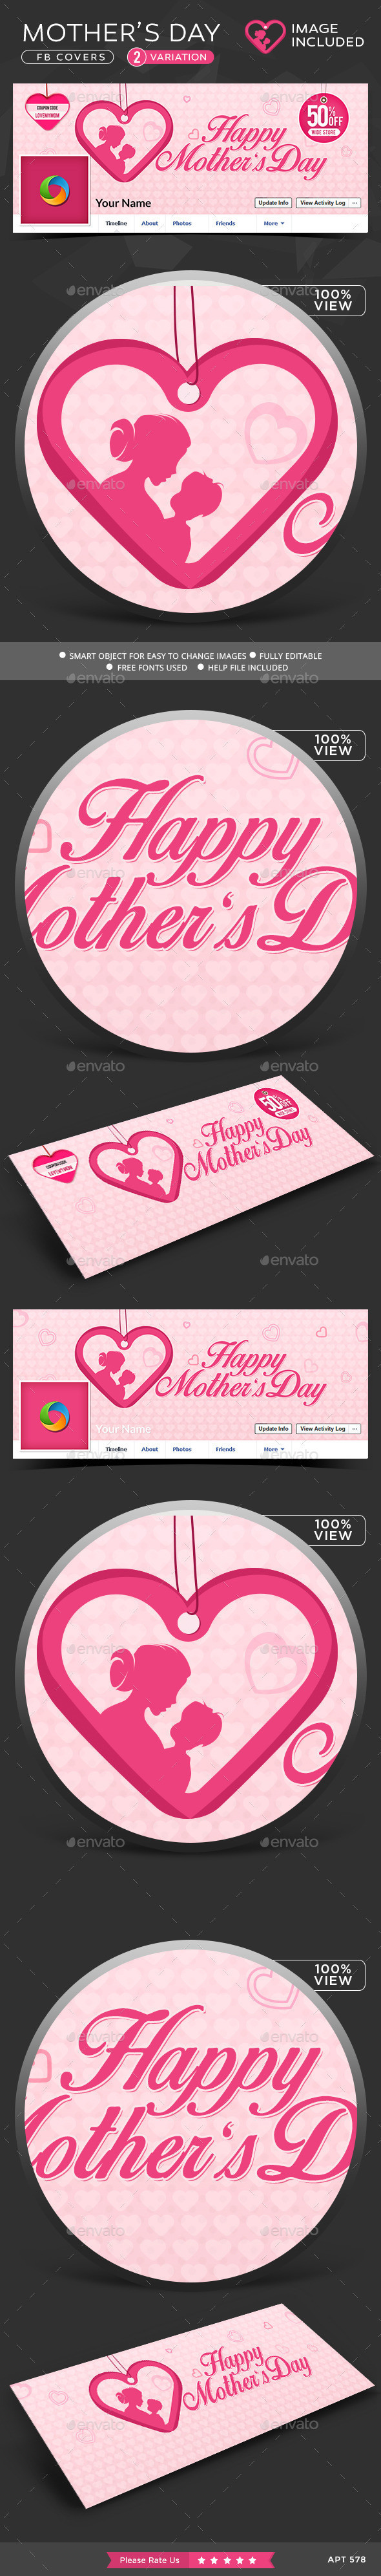 Apt 578 mothers 20day 20fb 20covers preview